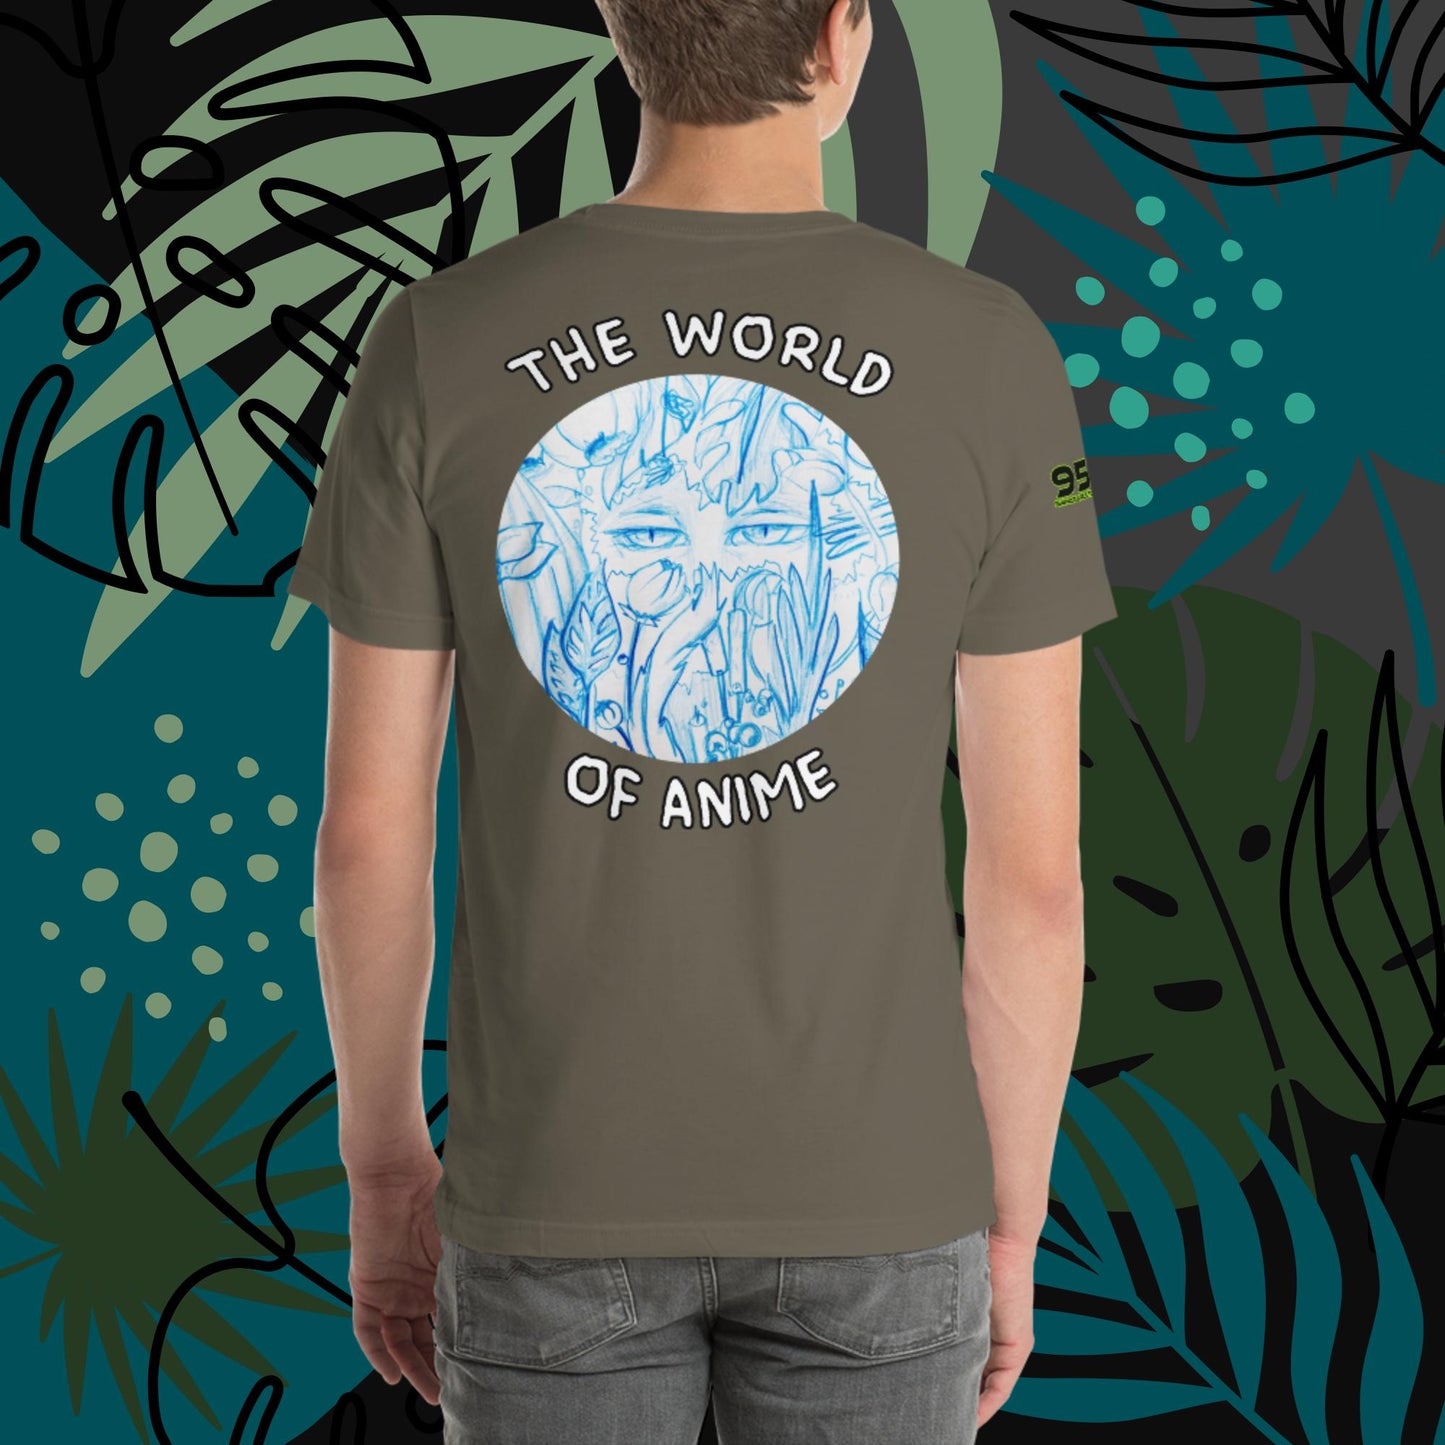 The World of Anime 954 Collection Unisex t-shirt